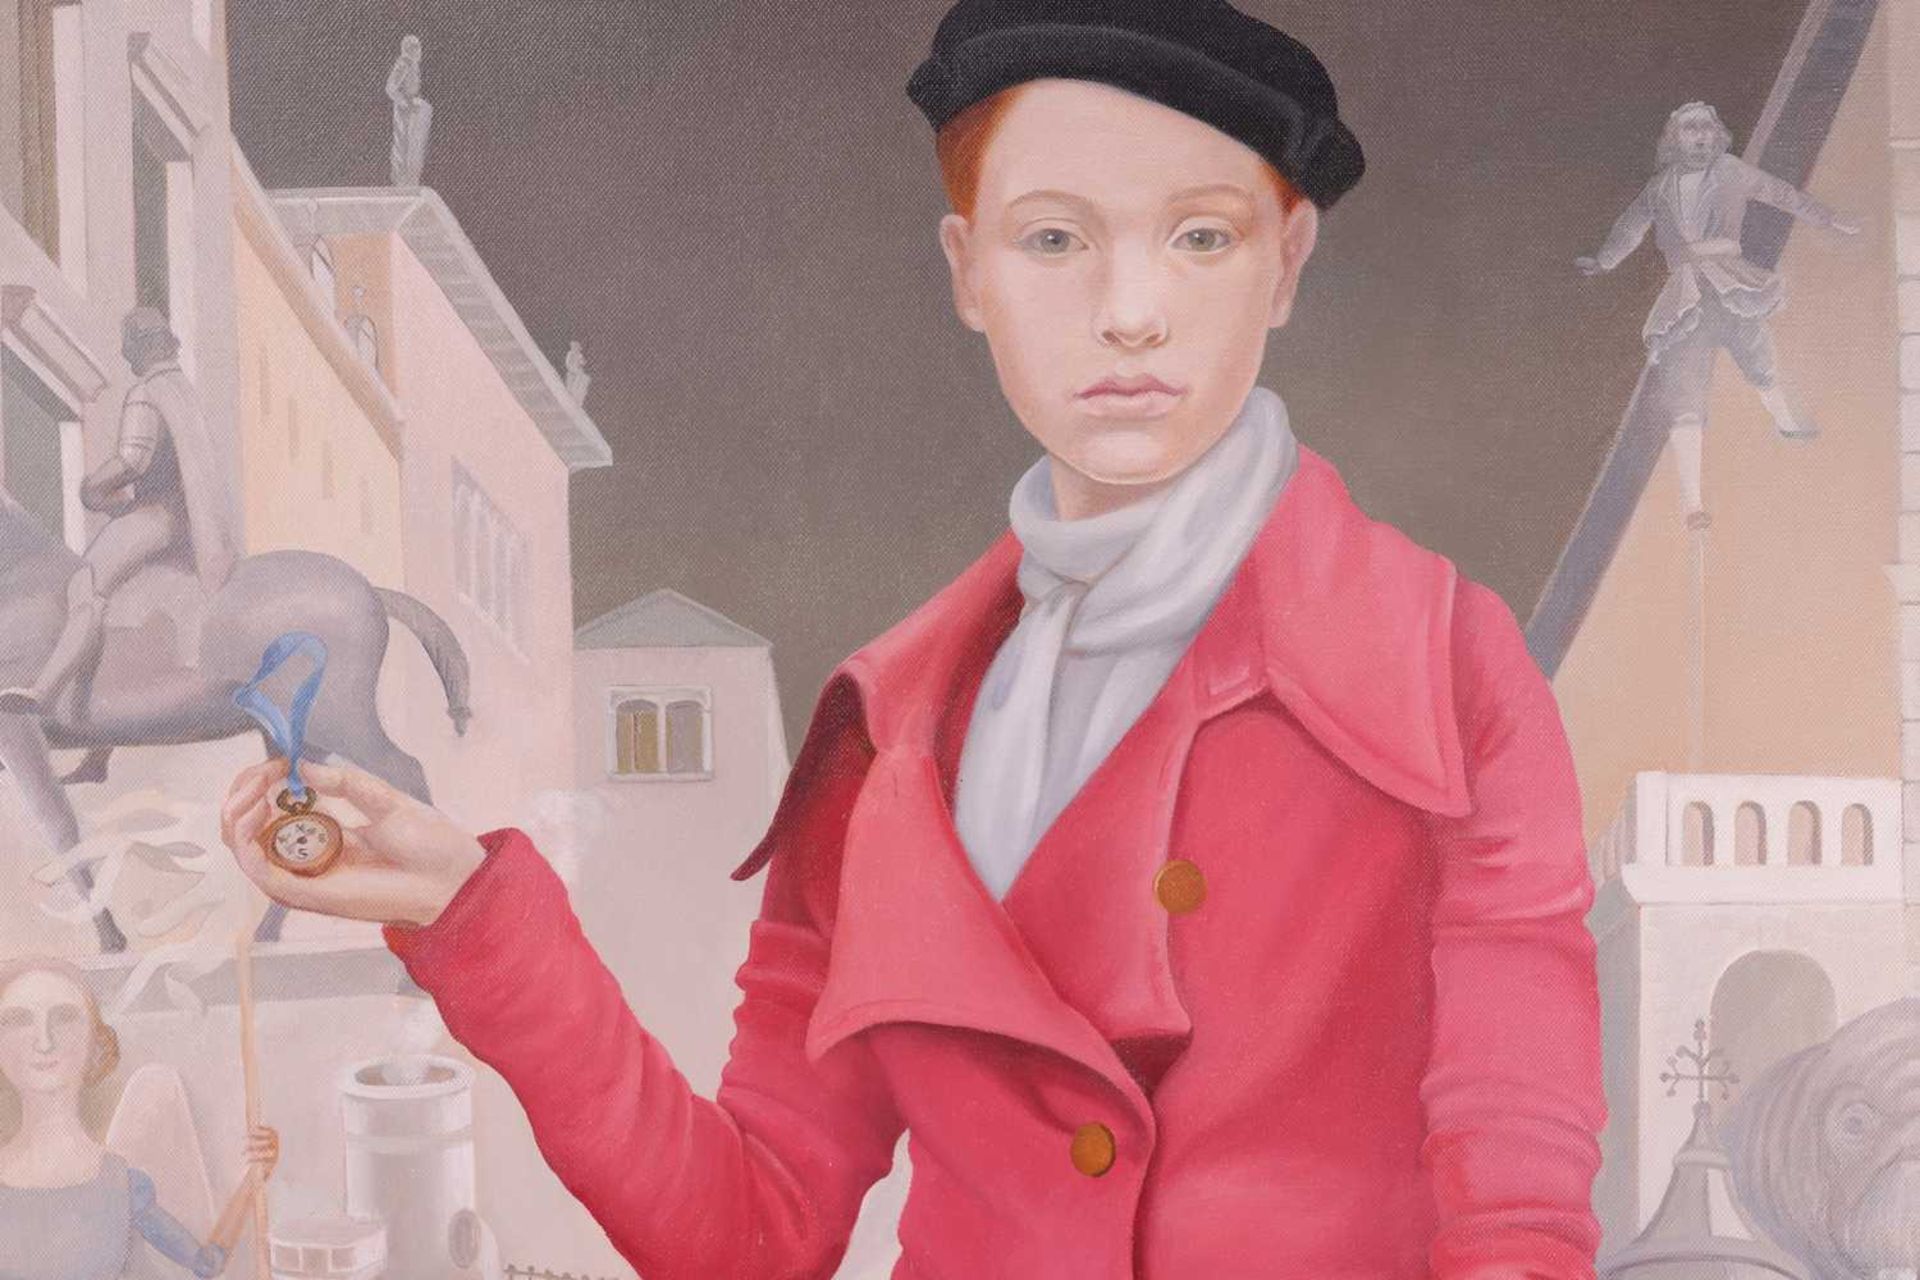 Lizzie Riches (b. 1950), 'Heir to the City' (2010/11), signed 'Lizzie Riches' (lower centre), labell - Image 4 of 12